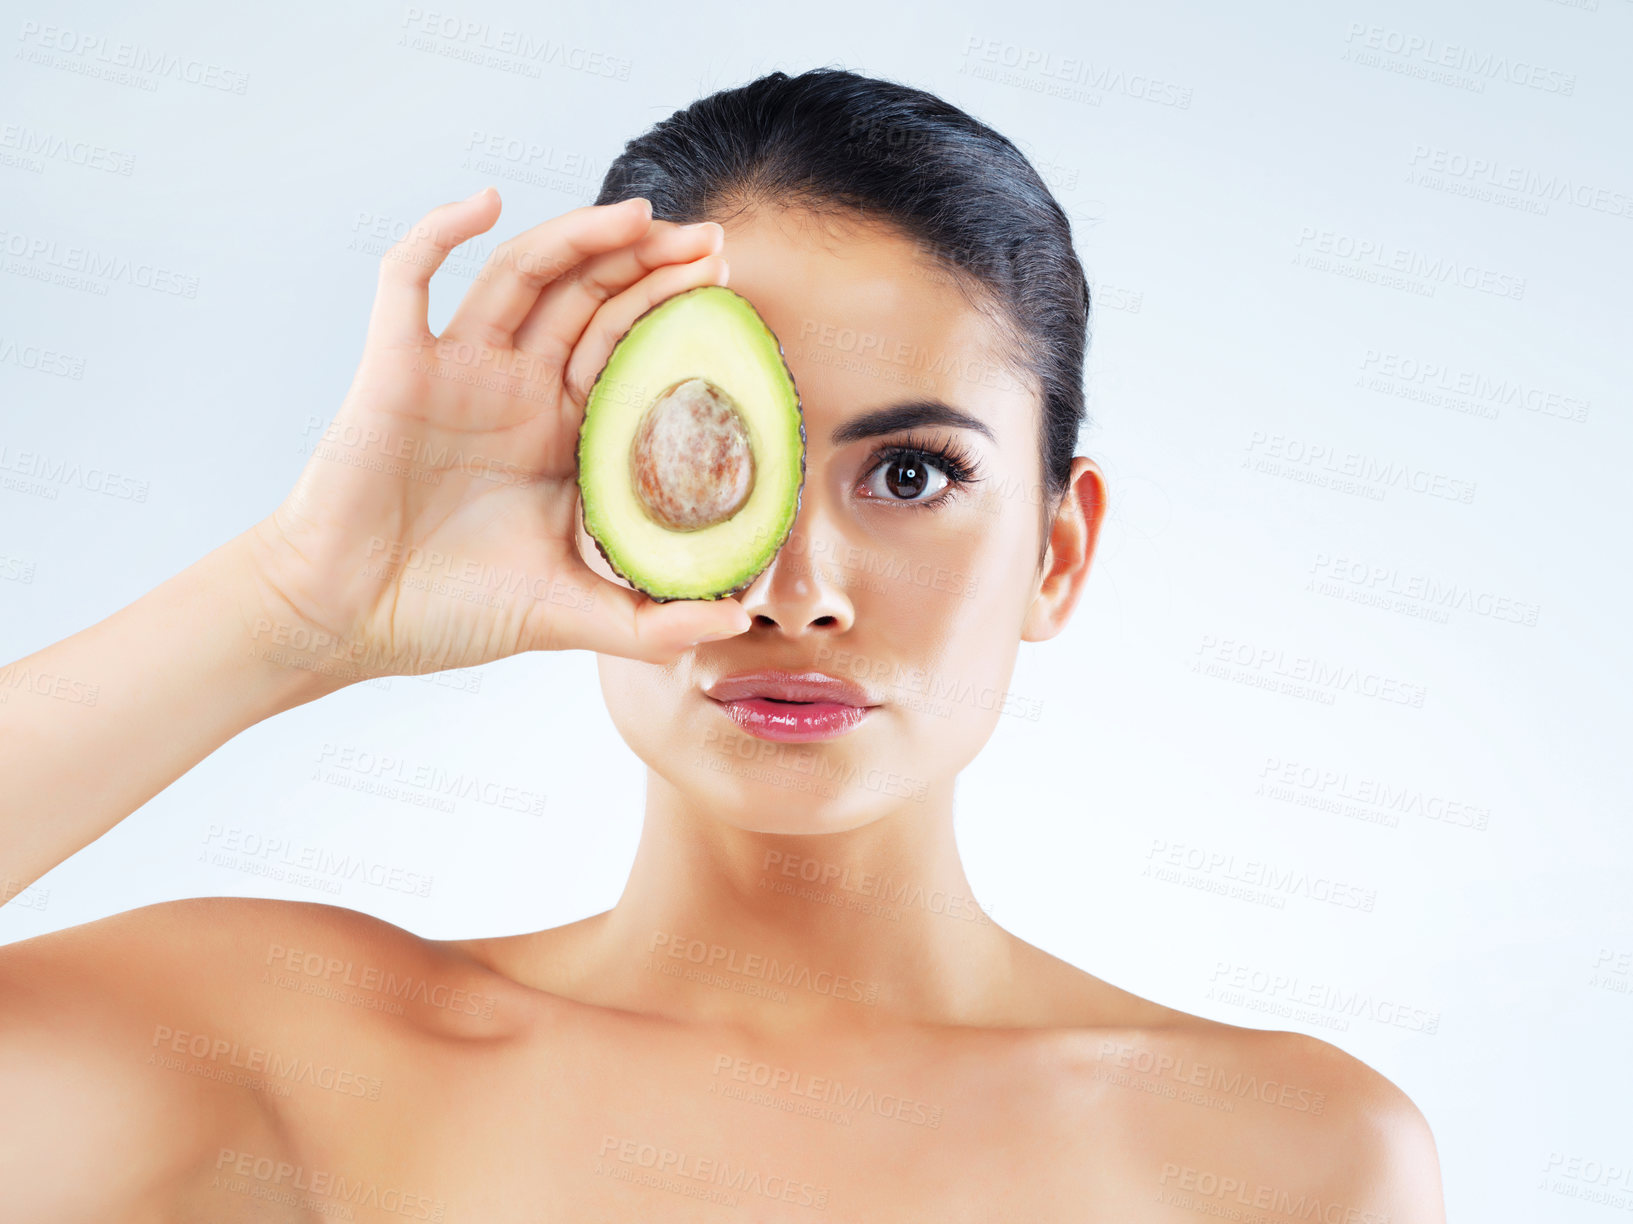 Buy stock photo Studio portrait of an attractive young woman covering her eye with an avocado against a gray background